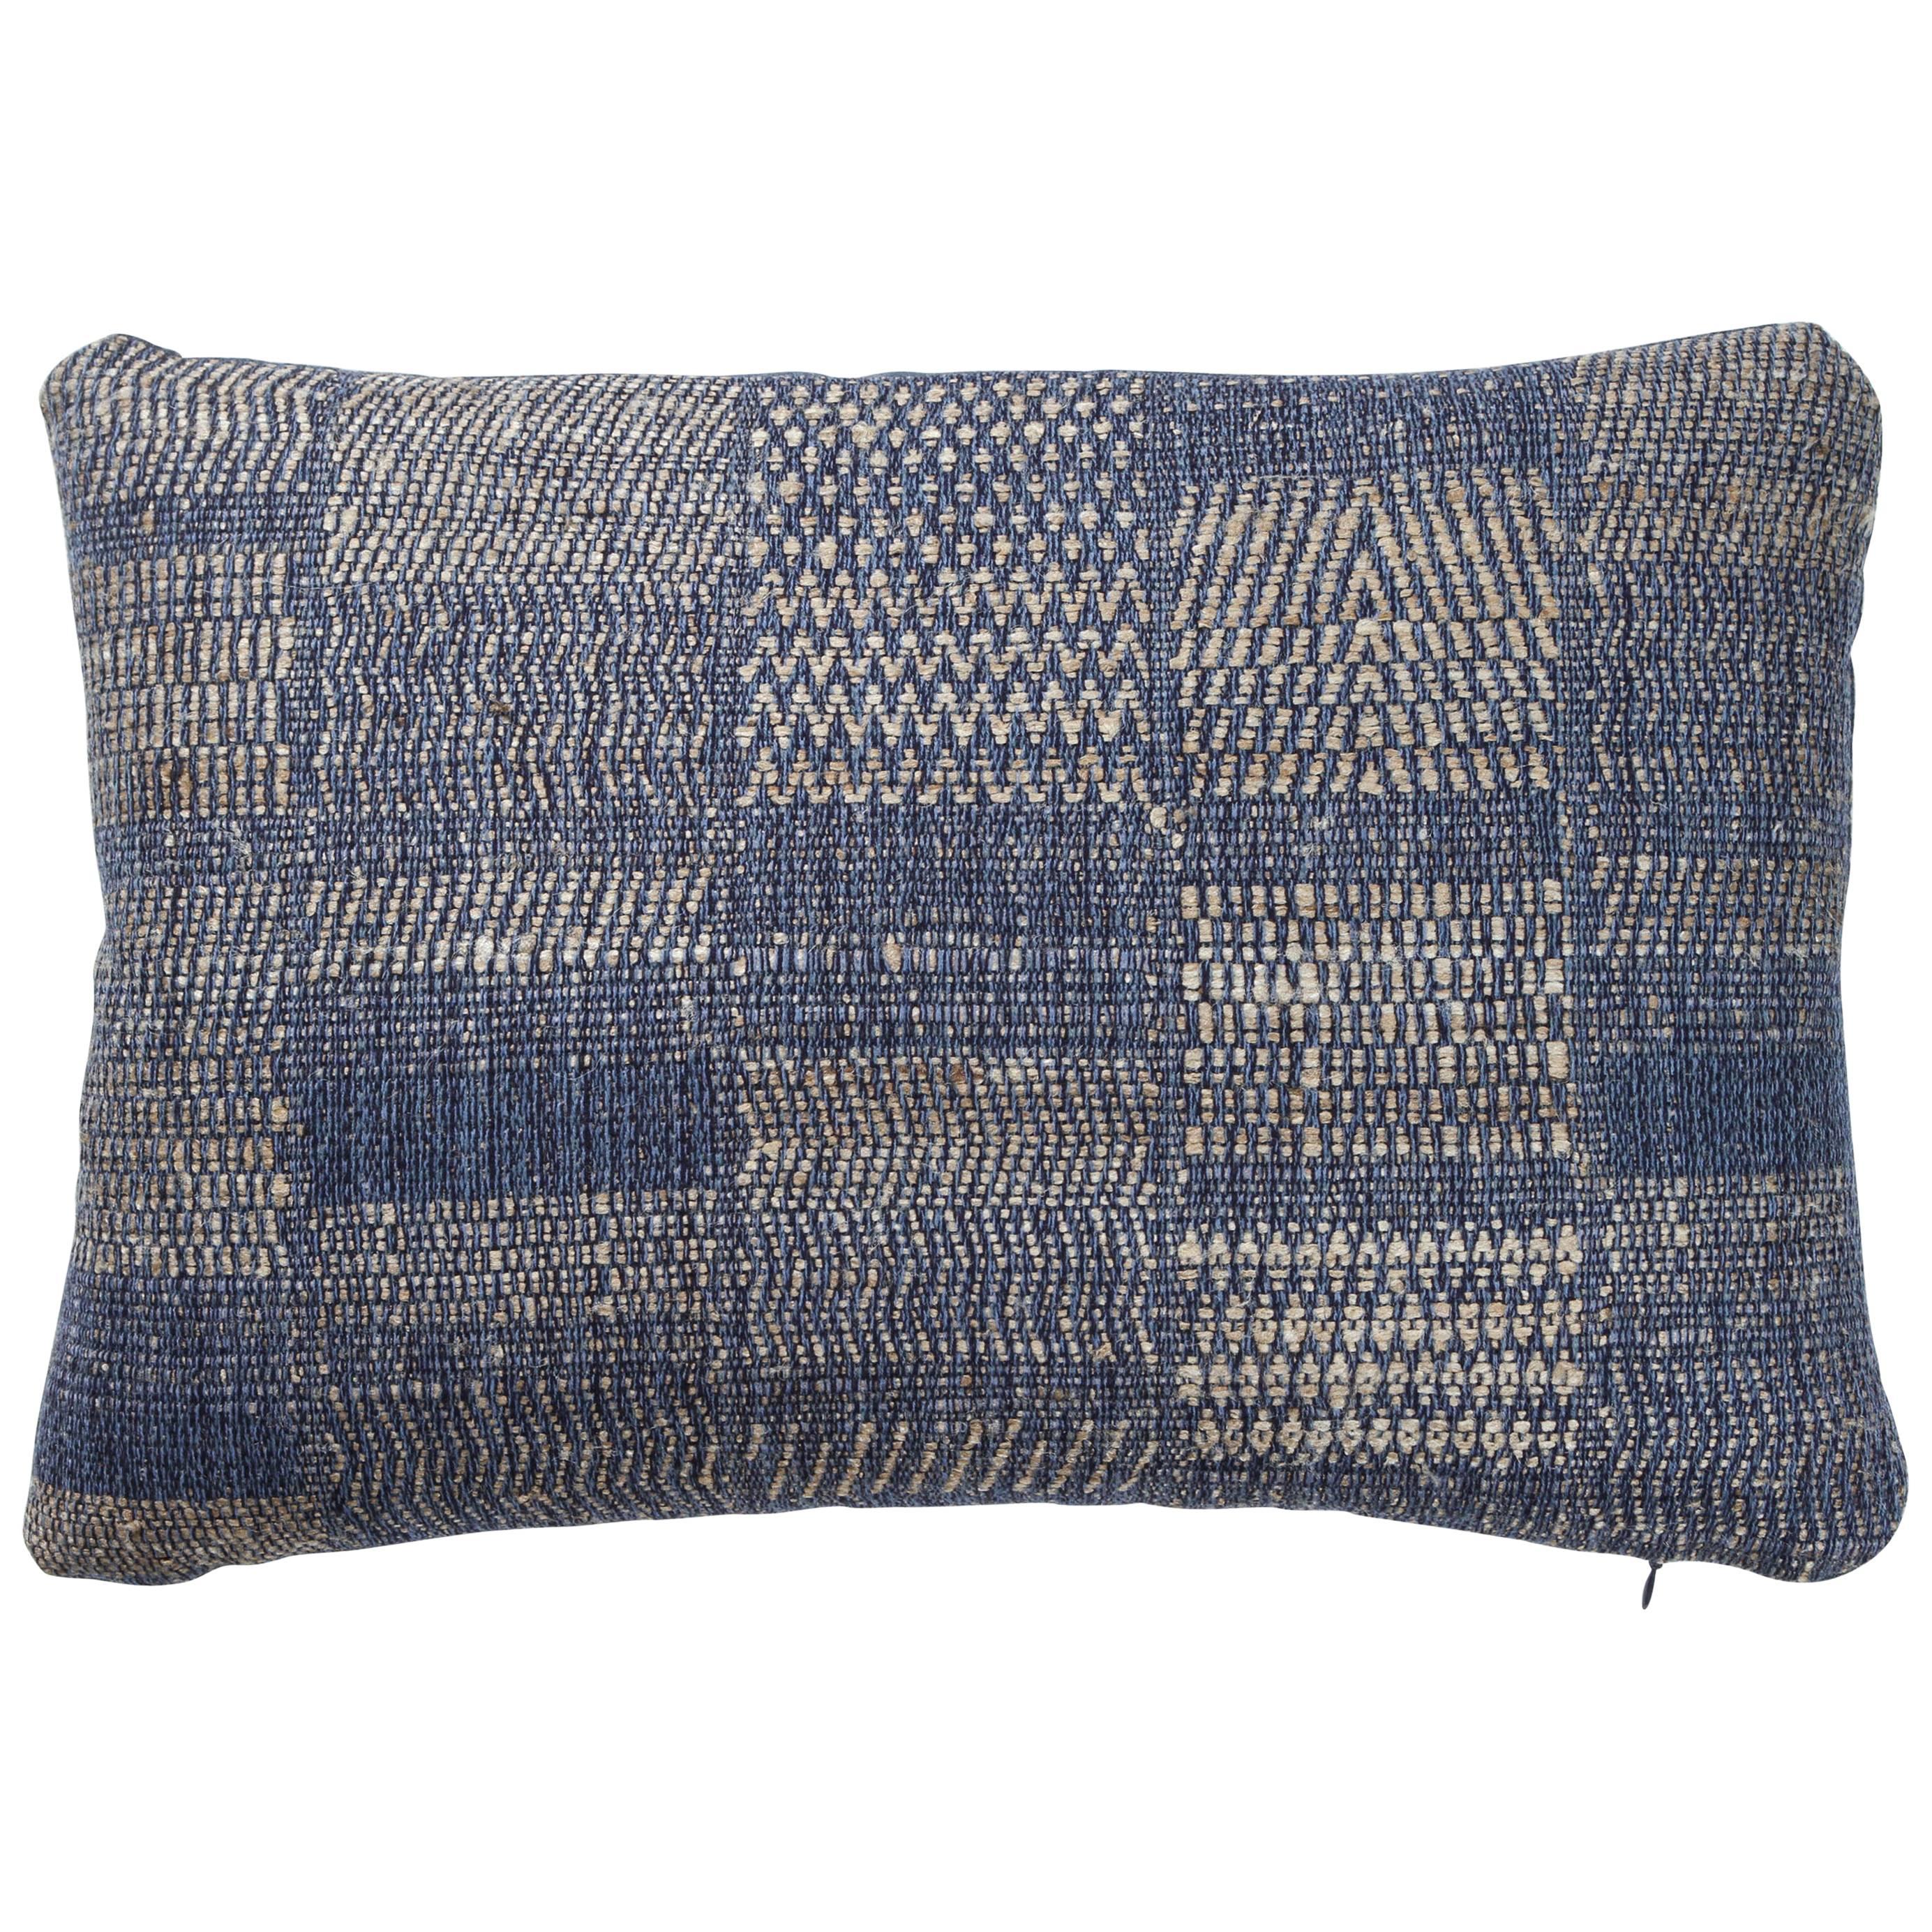 Indian Handwoven Pillow.  Blue and Beige.  For Sale